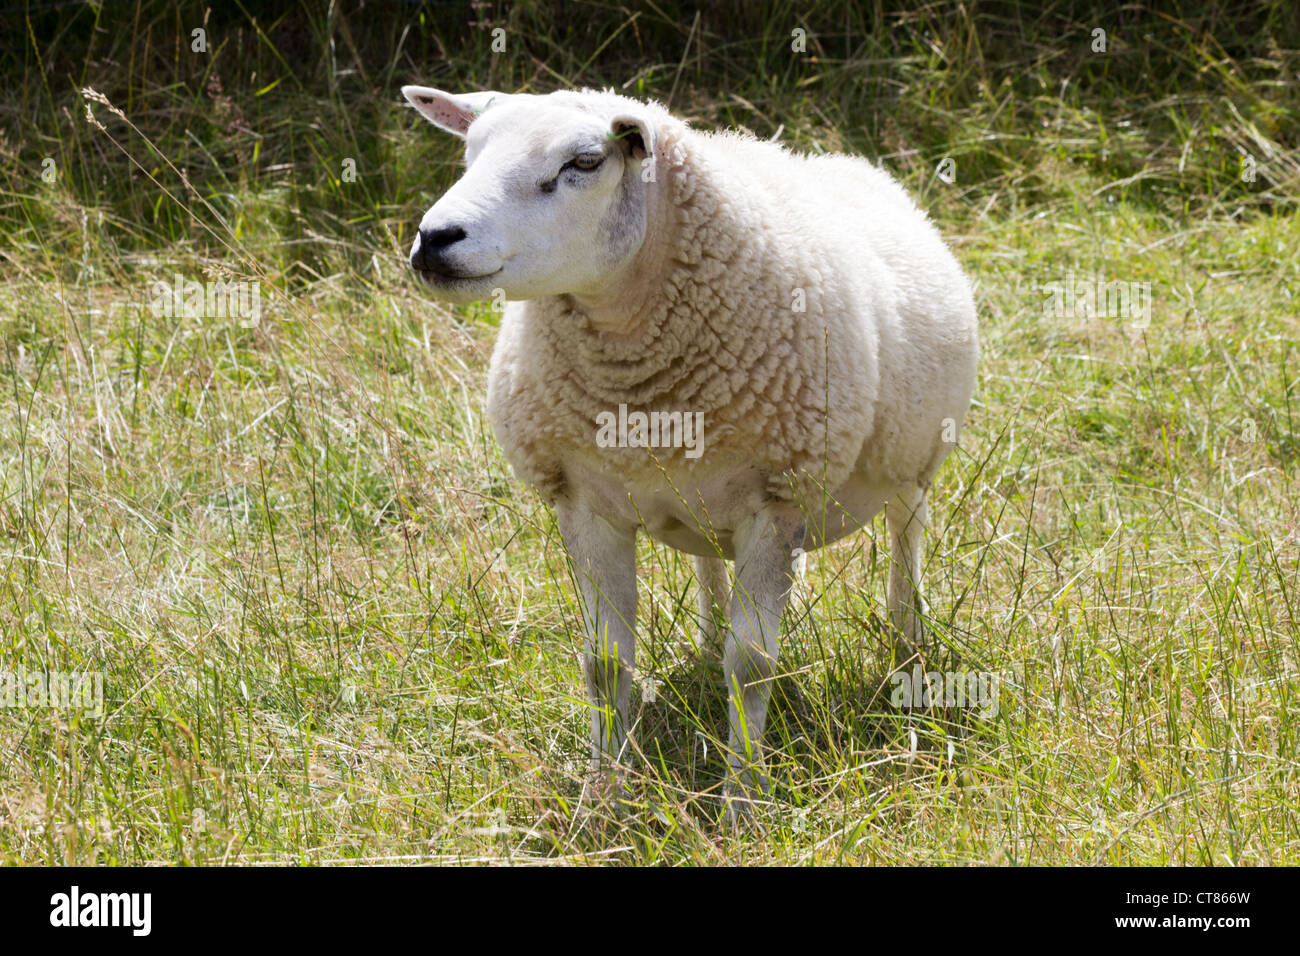 A sheep in a meadow field Stock Photo